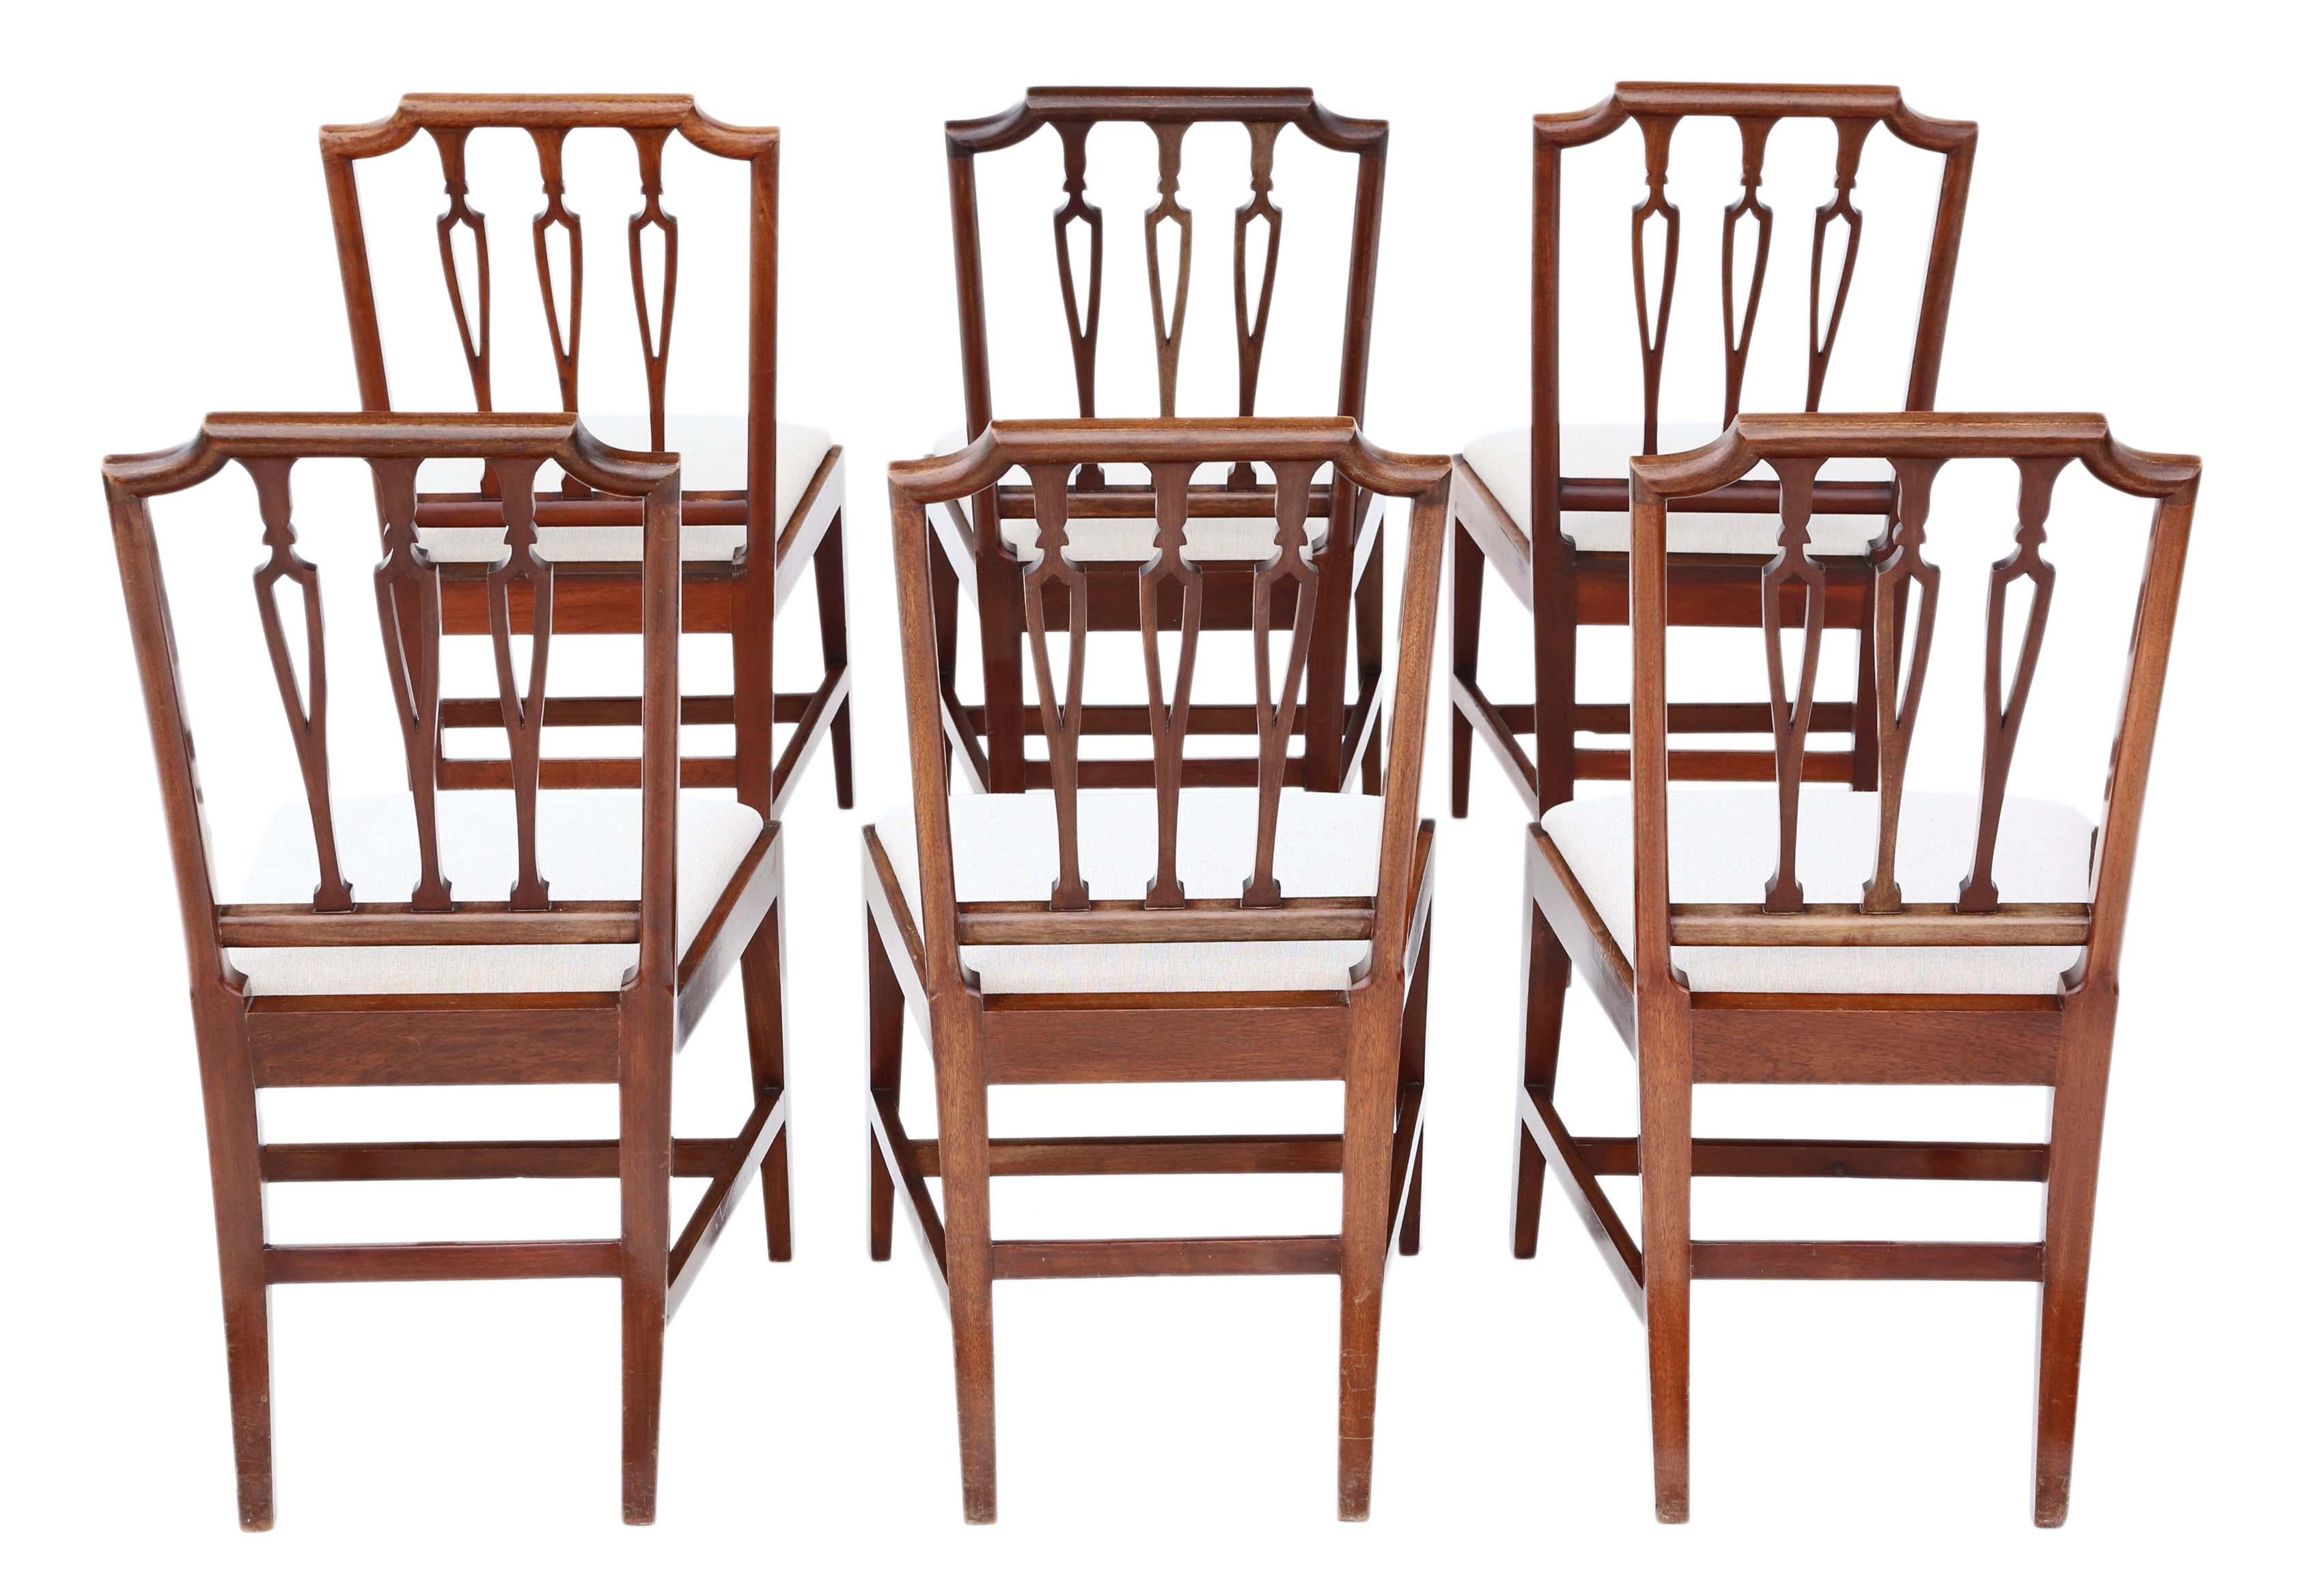 Antique fine quality set of 6 19th century mahogany dining chairs.

No loose joints and no woodworm.

New upholstery in a natural linen fine oatmeal fabric.

Overall maximum dimensions:

Chair 51cm W x 51cm D x 94cm H (45cm H seat when sat